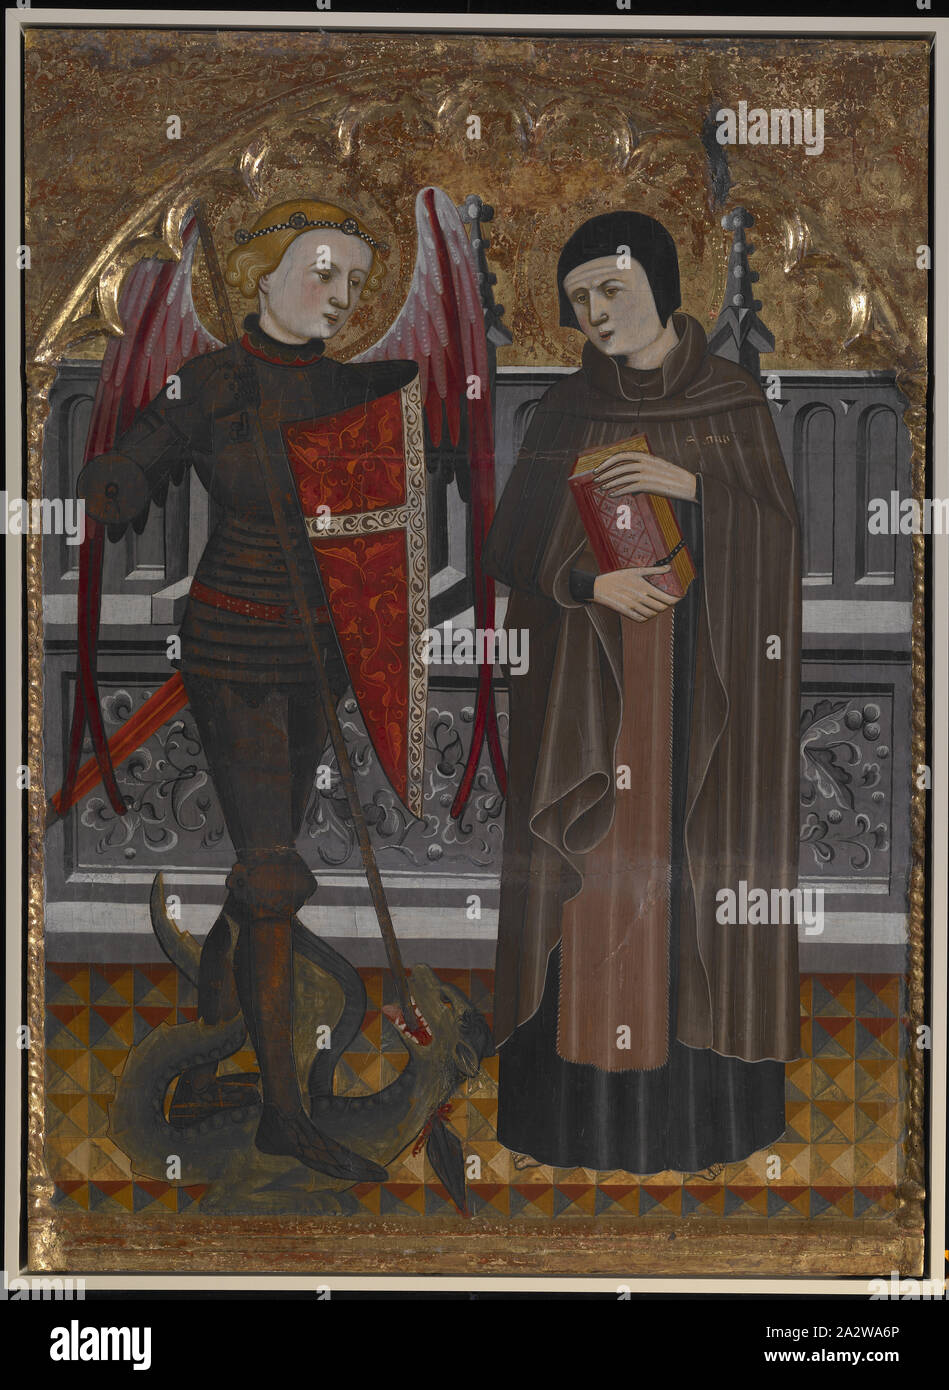 St. Michael and St. Amador, Pere Vall (Spanish, 1380-1480), about 1405, tempera and gold on wood, 35-1/2 x 26 in., European Painting and Sculpture Before 1800 Stock Photo